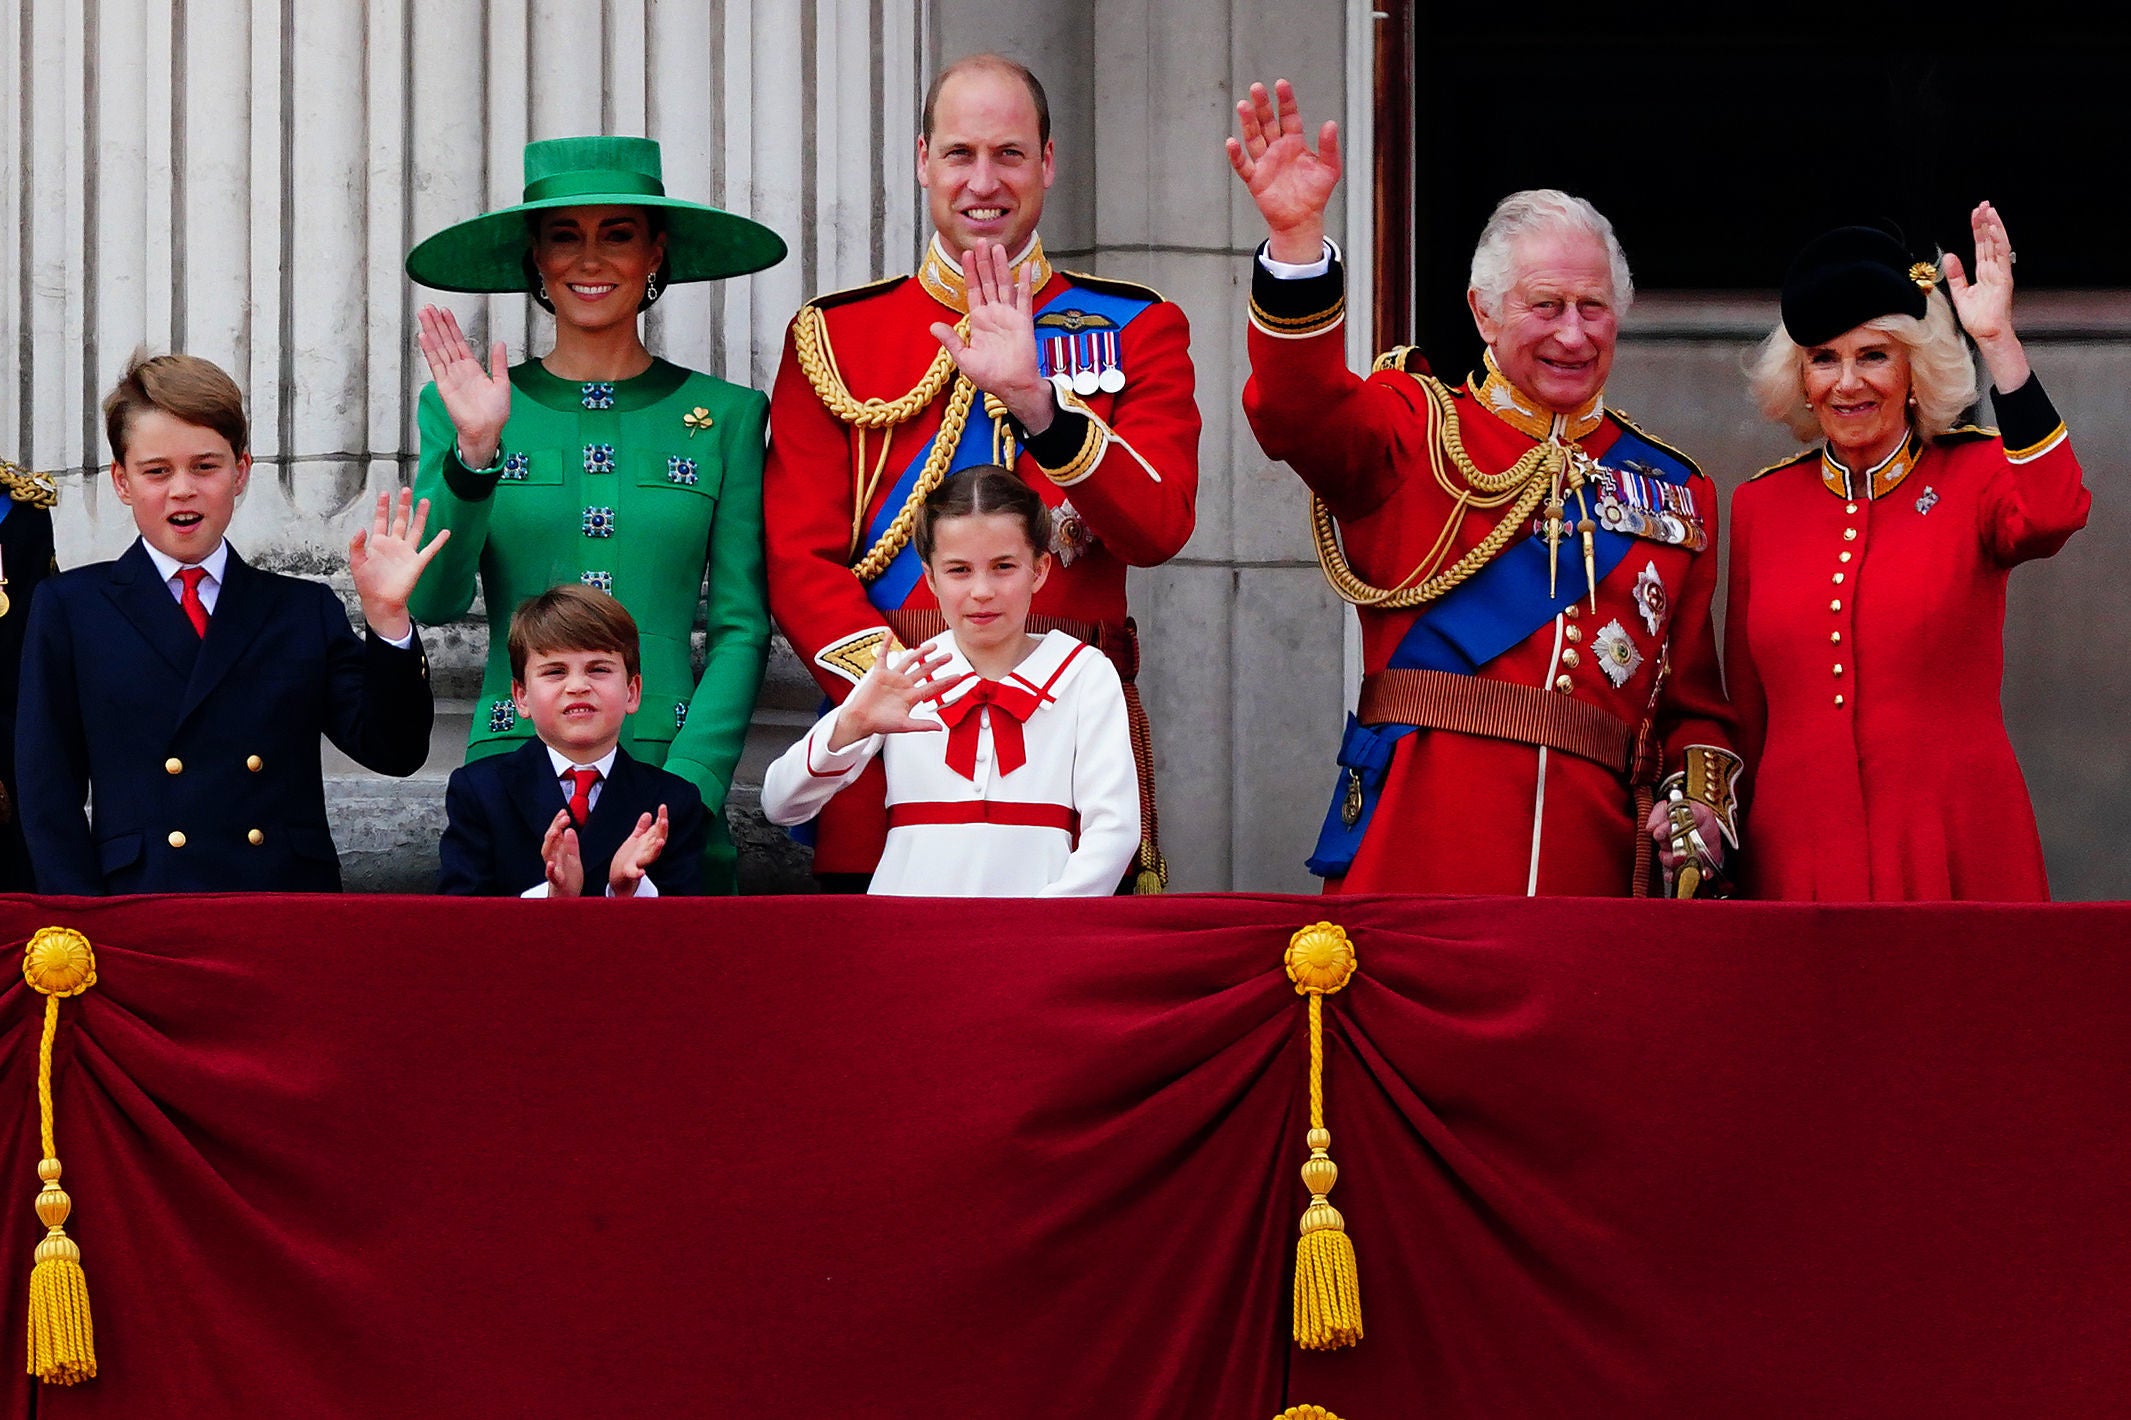 Last year’s Trooping the Colour ceremony